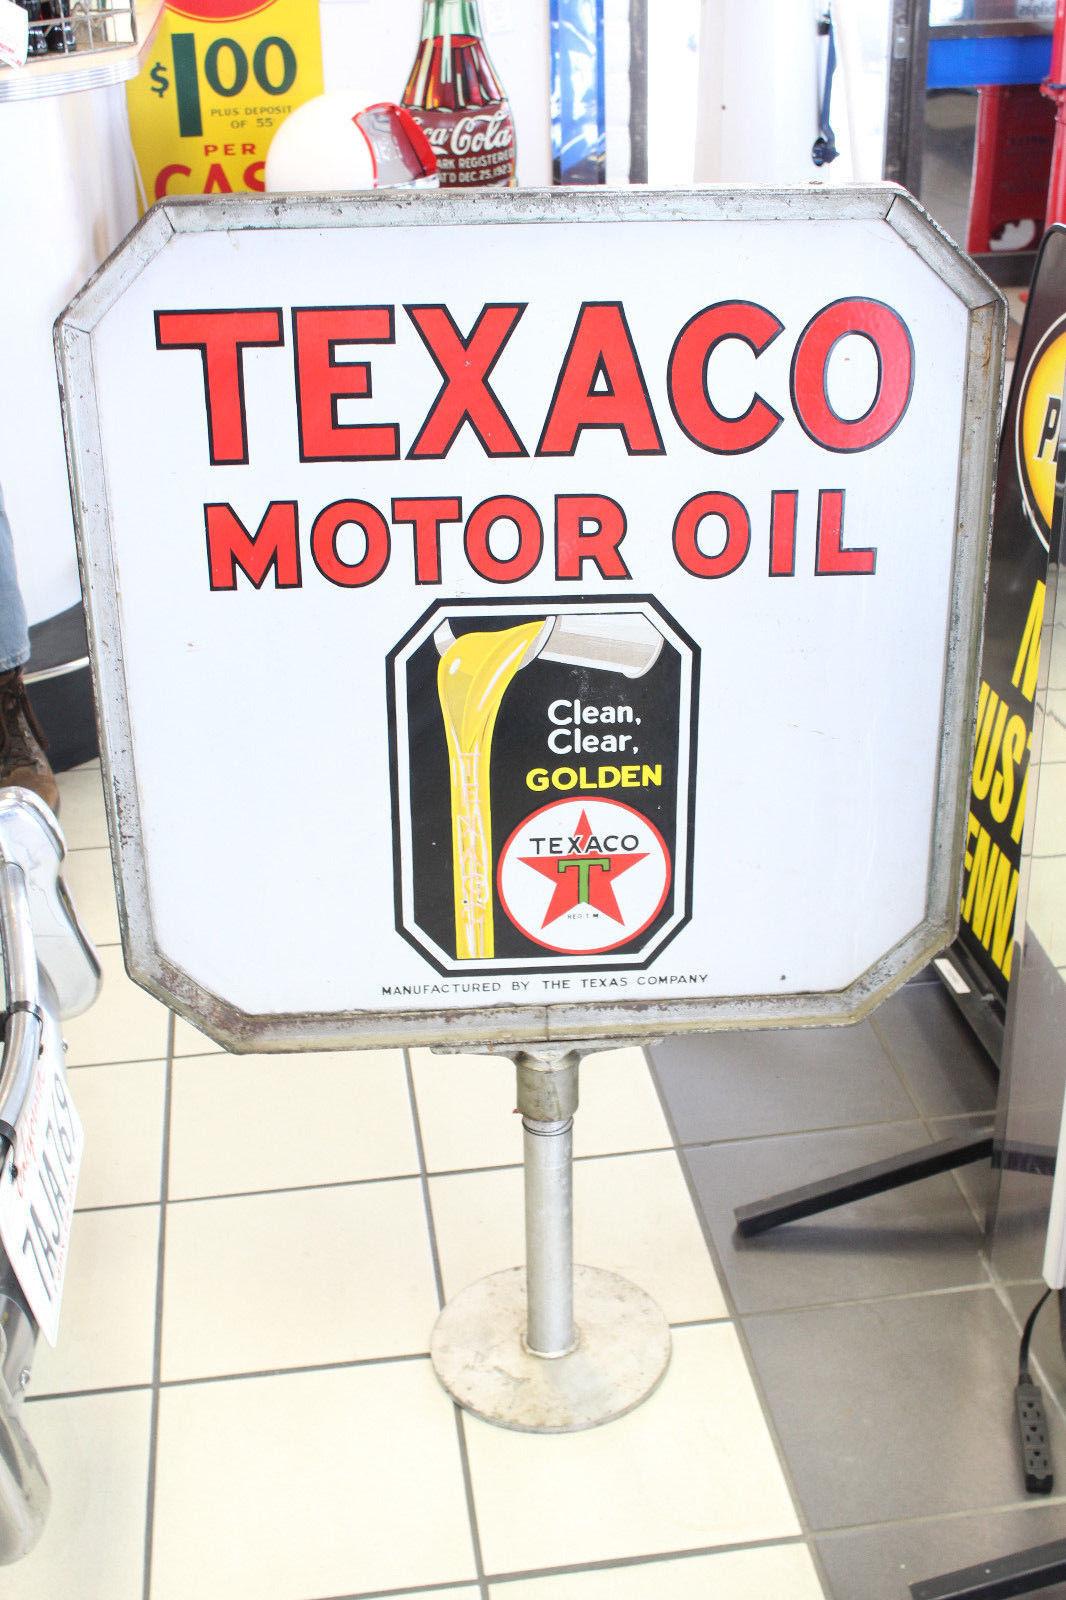 Classic and is still absolutely vibrant! This Texaco advertising sign is double sided and was normally used on the curbside or near a sidewalk. That would make this sign visible from either direction. Heavy duty porcelain with great graphics of